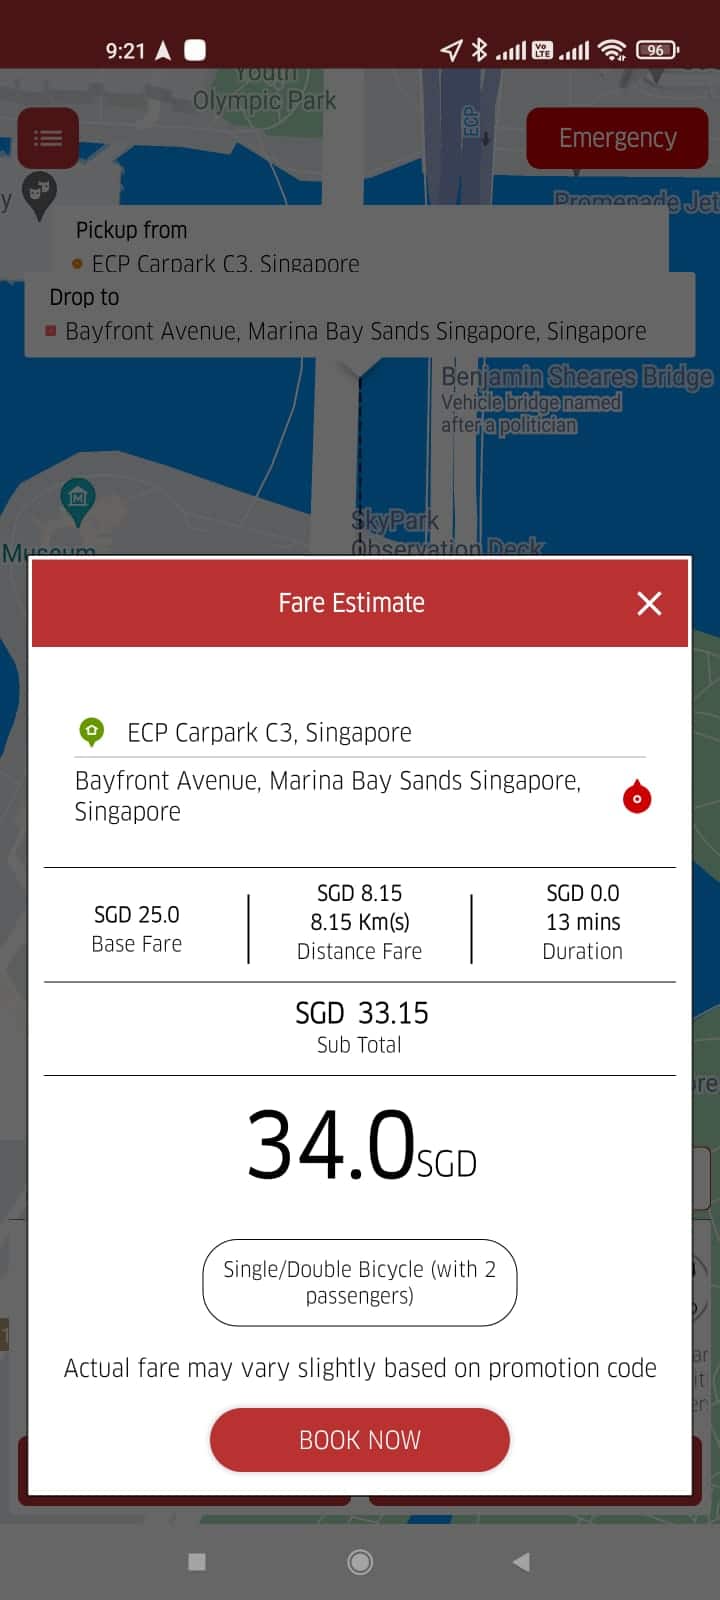 vimo services mobile app bicycle transport fare from east coast park to marina bay sands $34